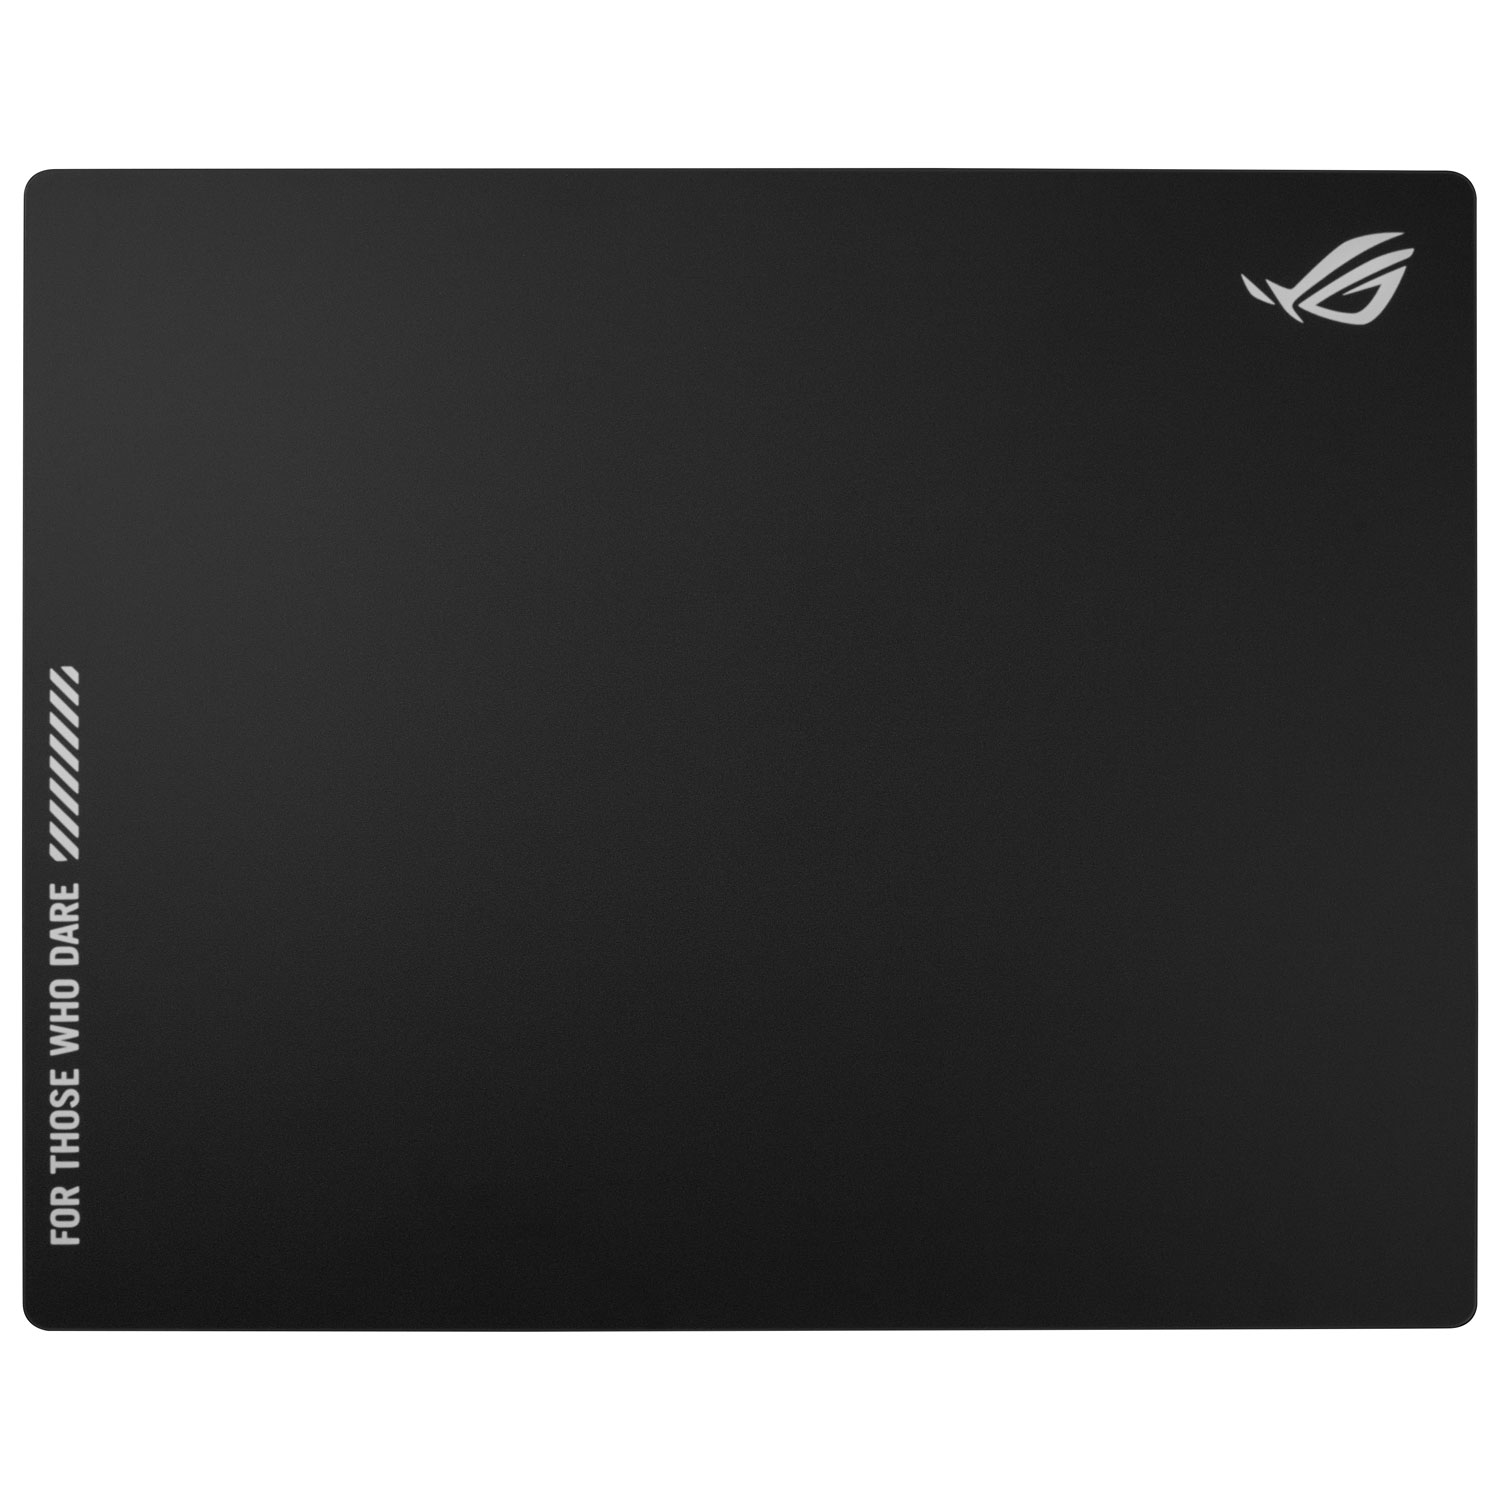 ASUS ROG Moonstone Ace Gaming Mouse Pad - Black - Only at Best Buy